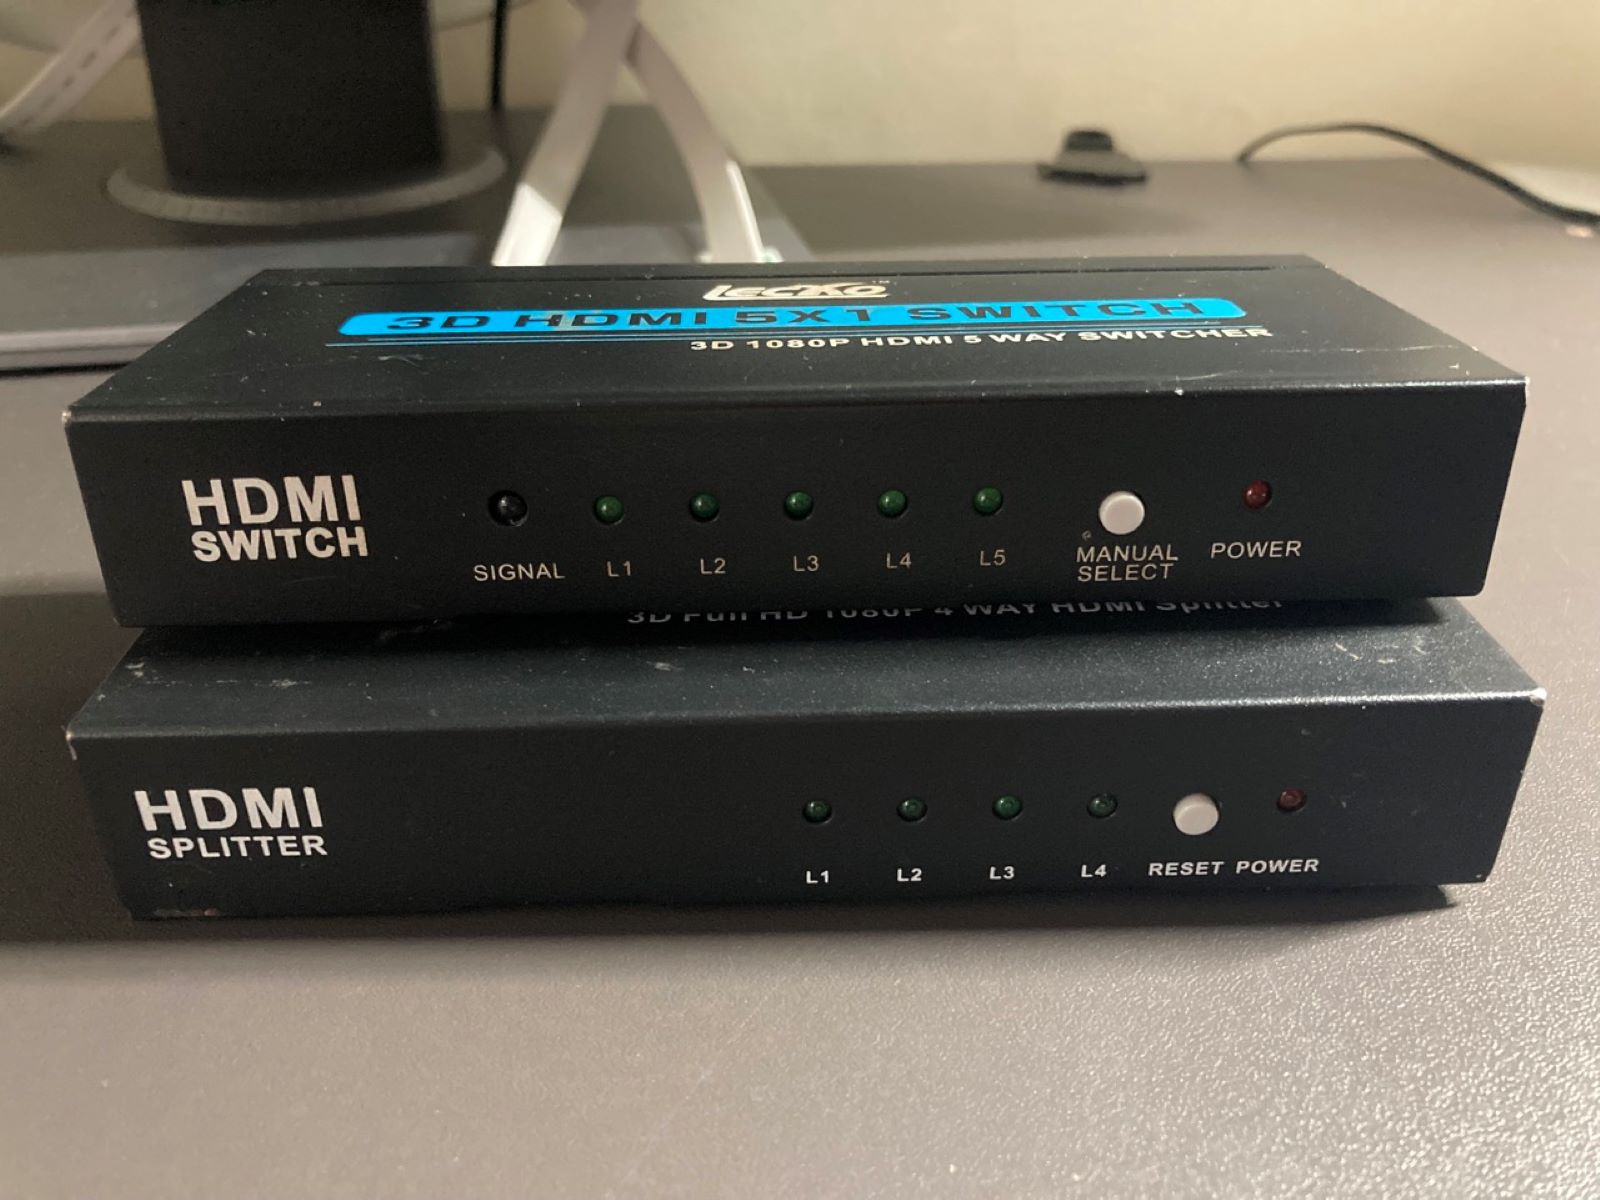 The Key Difference Between HDMI Splitters And HDMI Switches